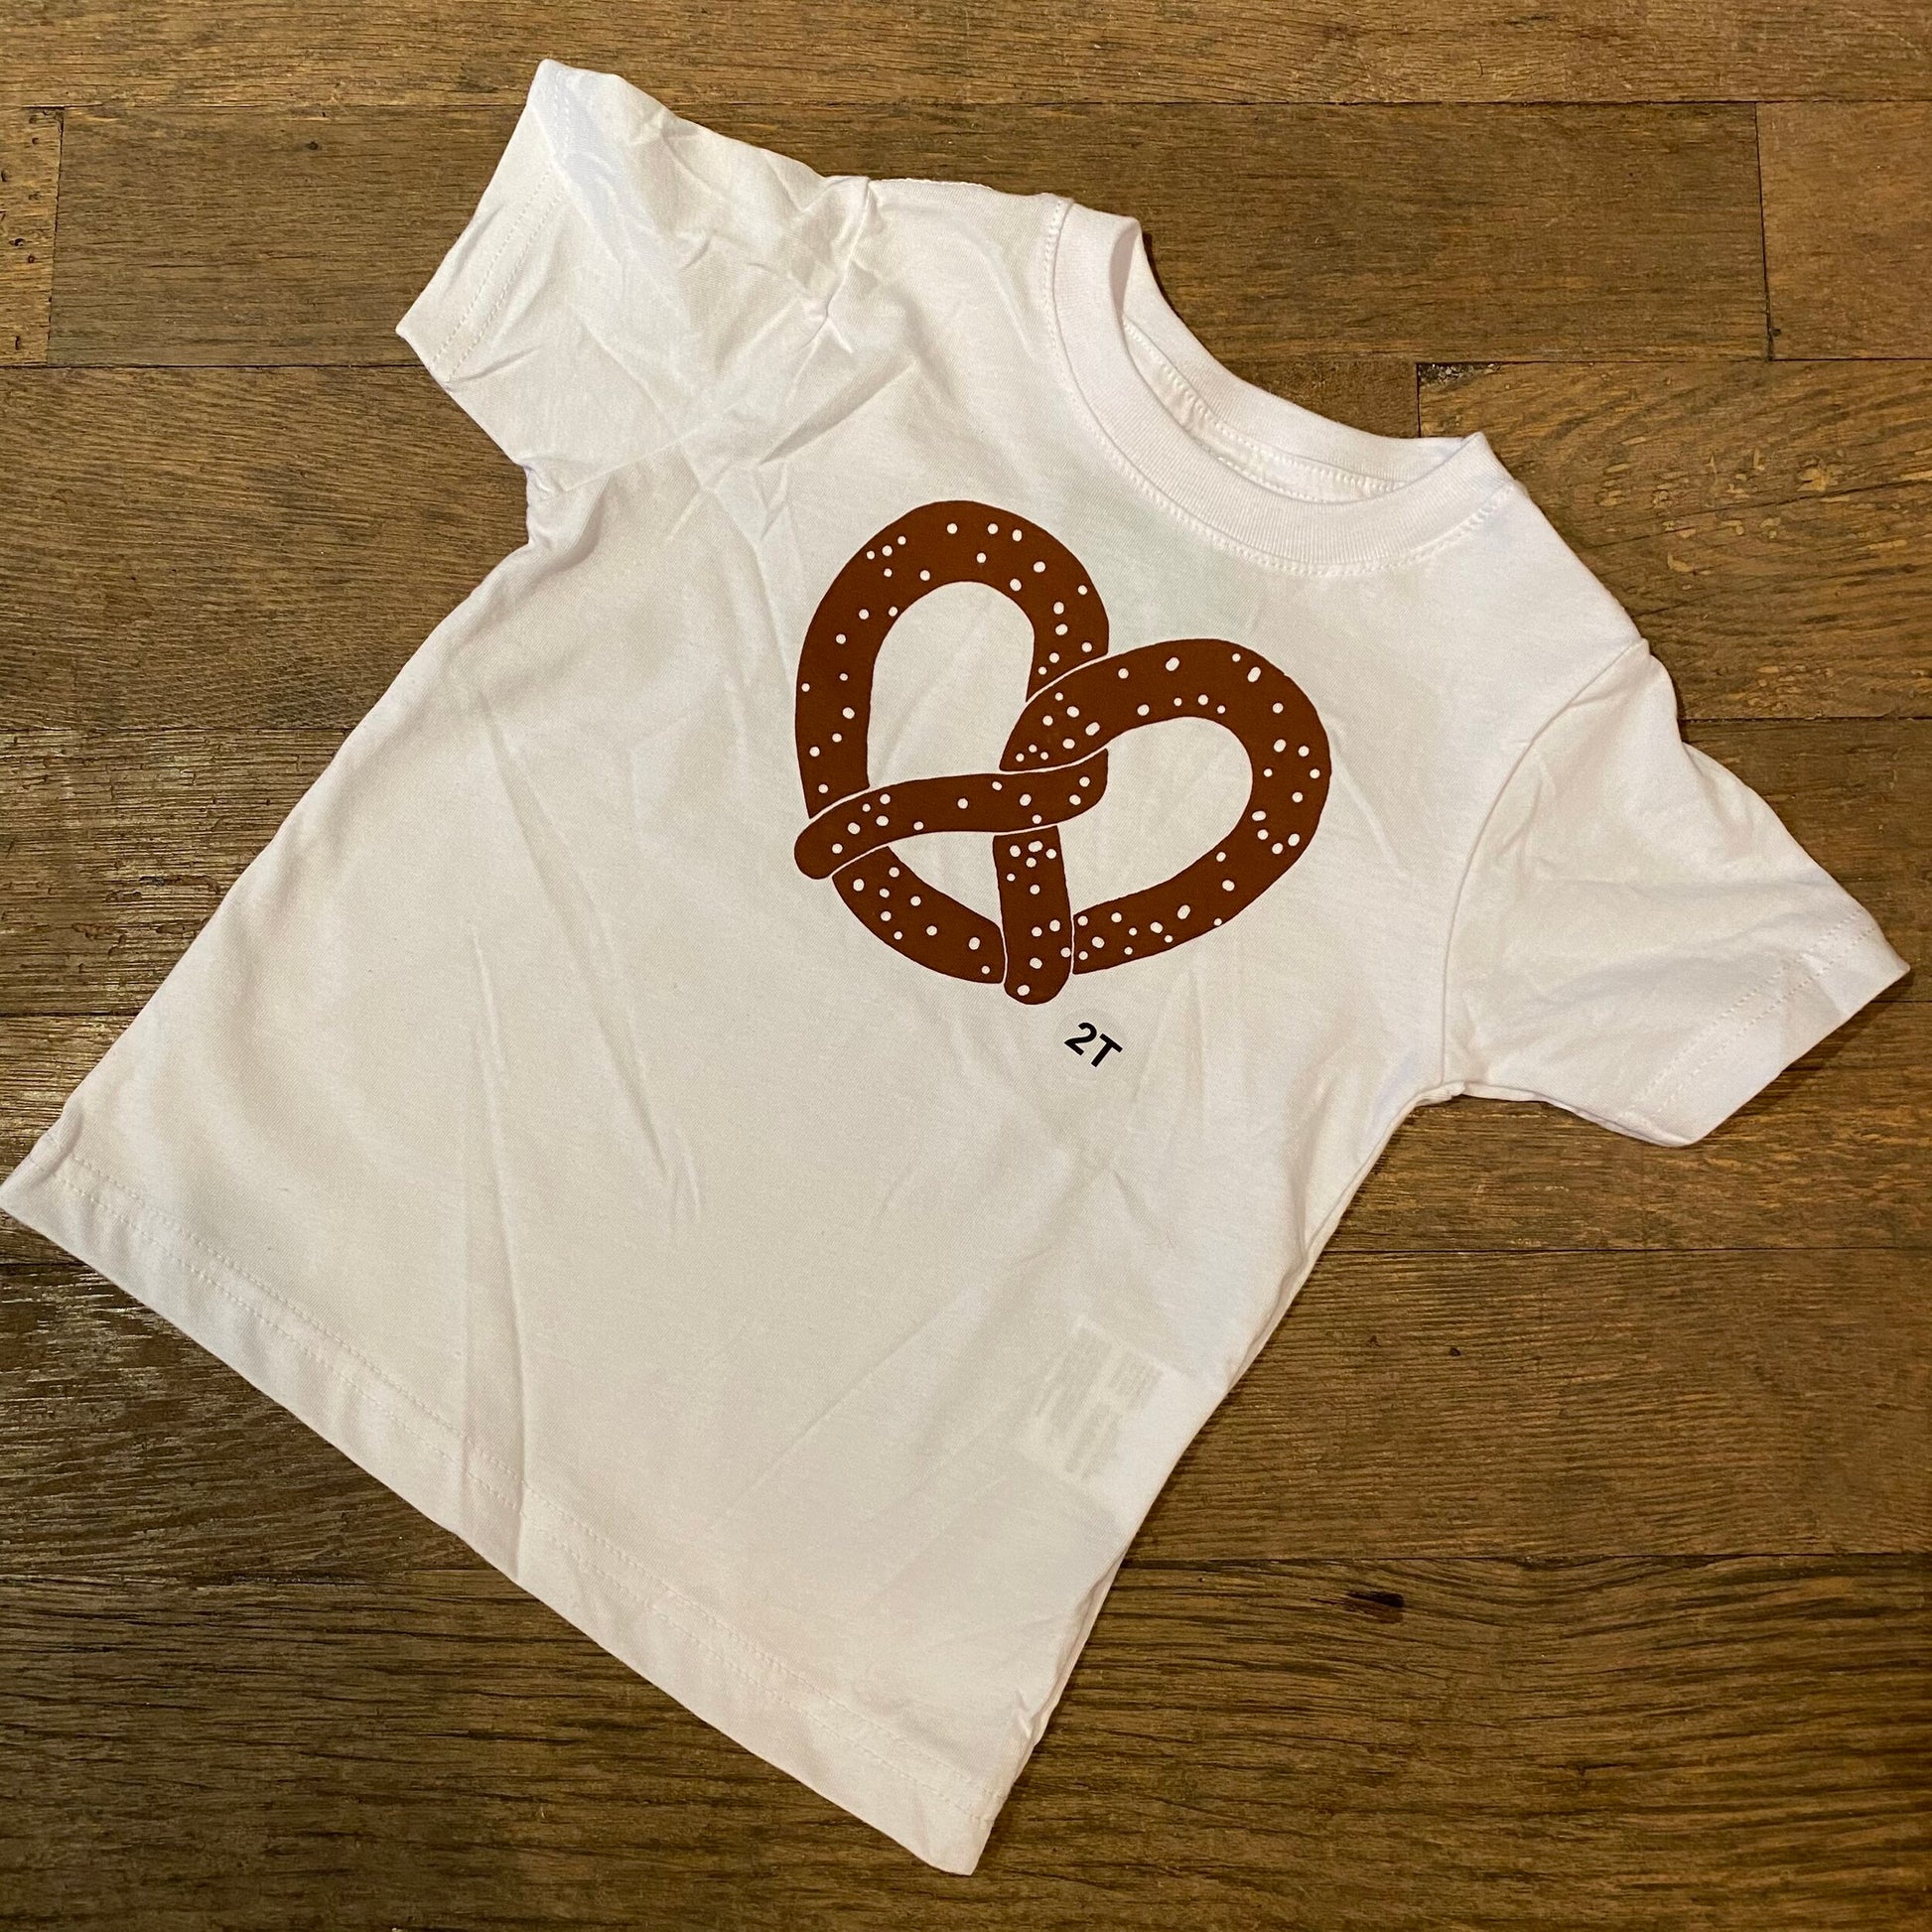 A white 100% cotton Pretzel Toddler T-Shirt with a Philly pretzel design by exit343design lying on a wooden floor.